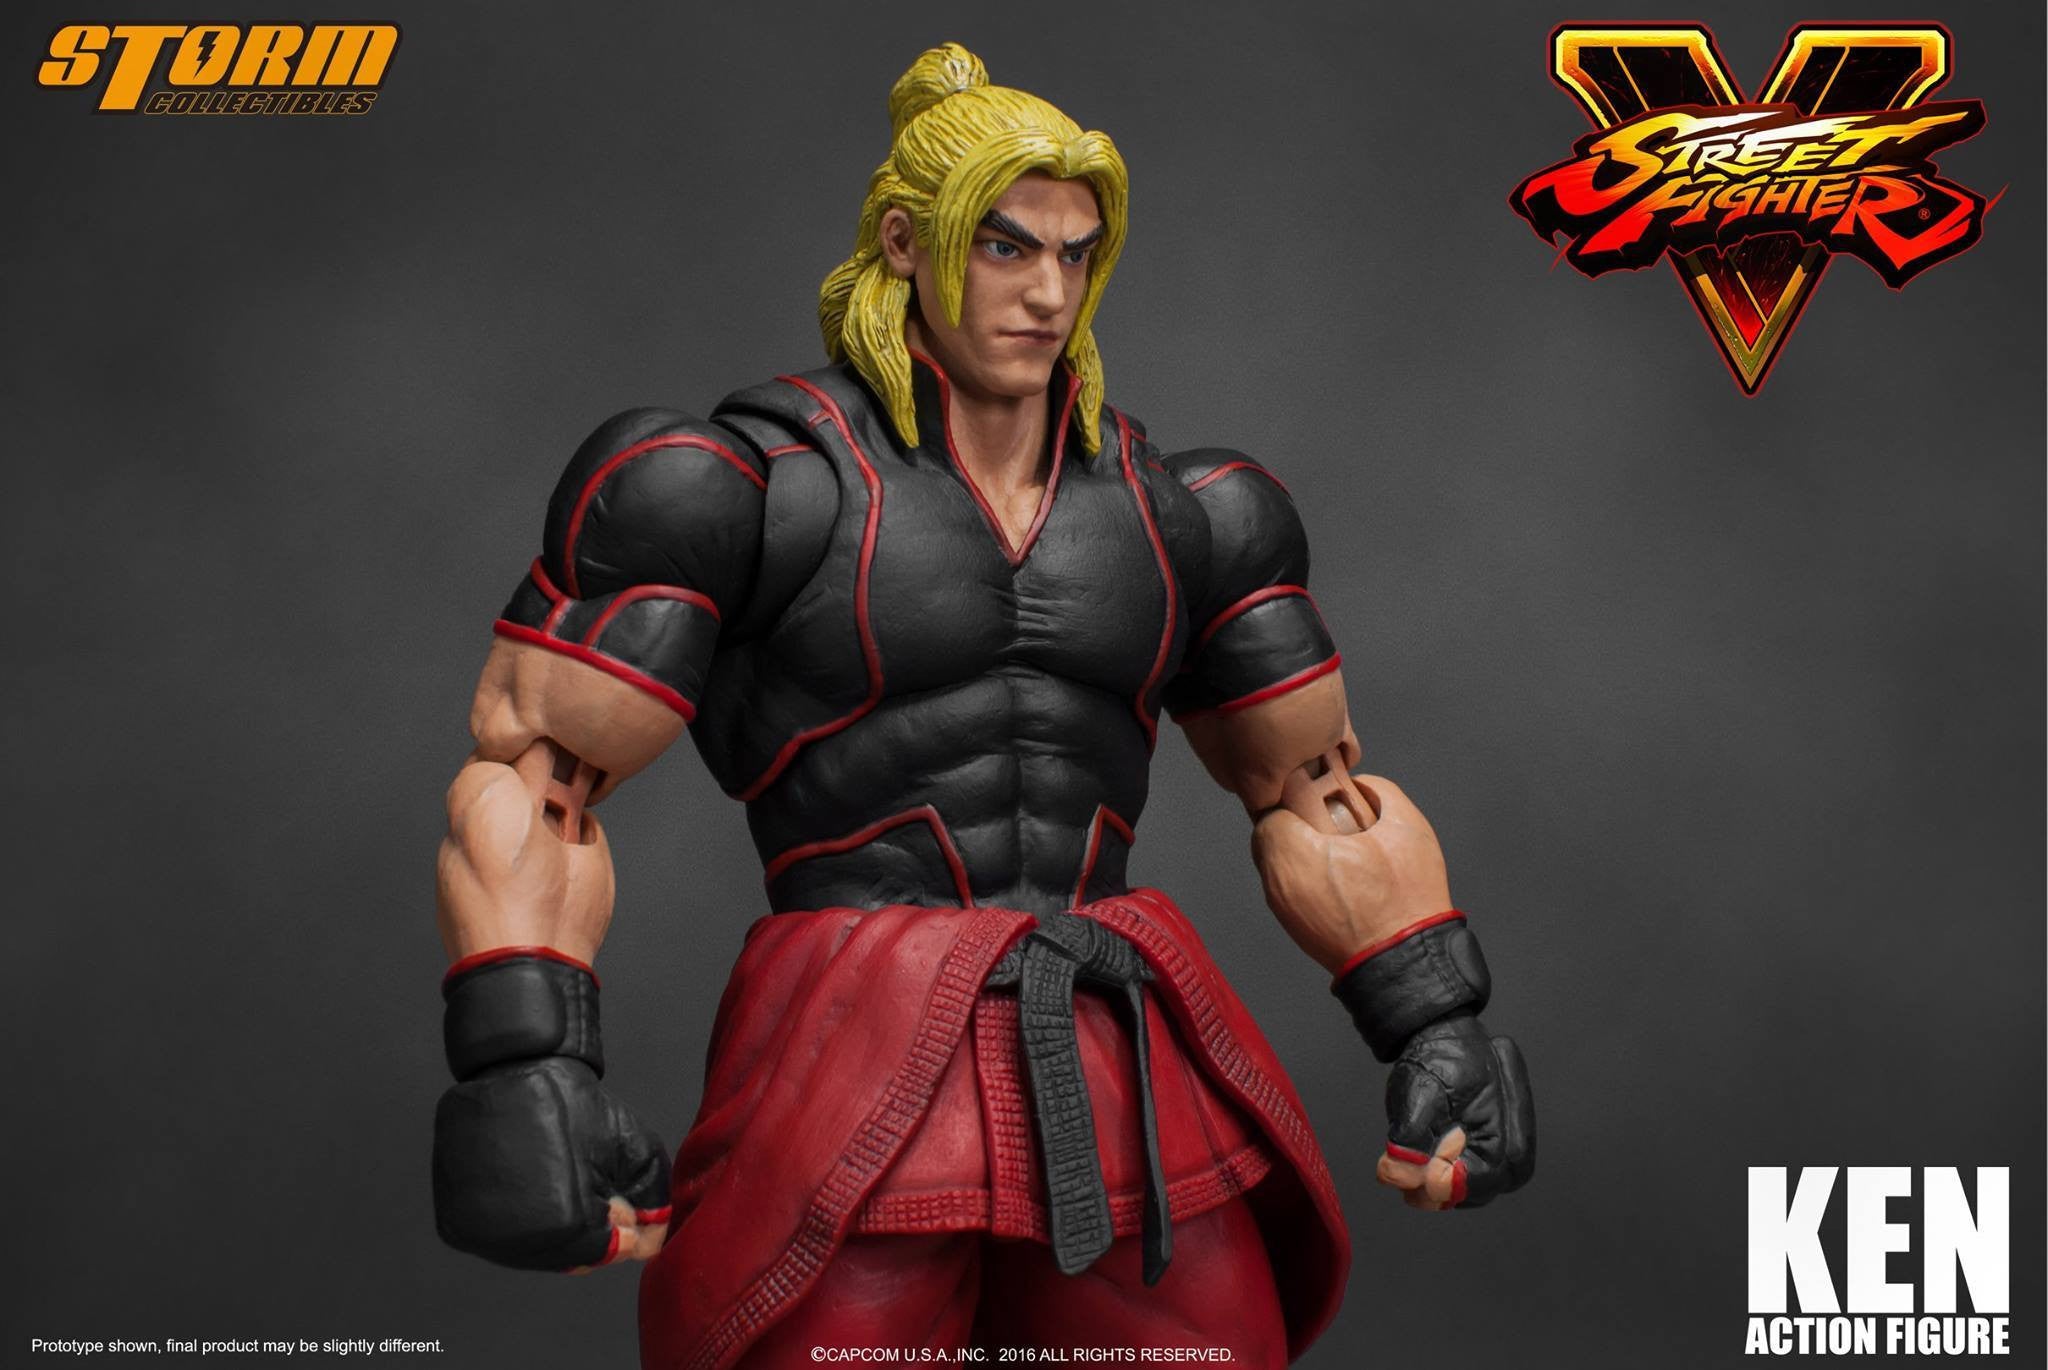 Storm Collectibles - 1:12 Scale Action Figure - Street Fighter V - Ken - Marvelous Toys - 14